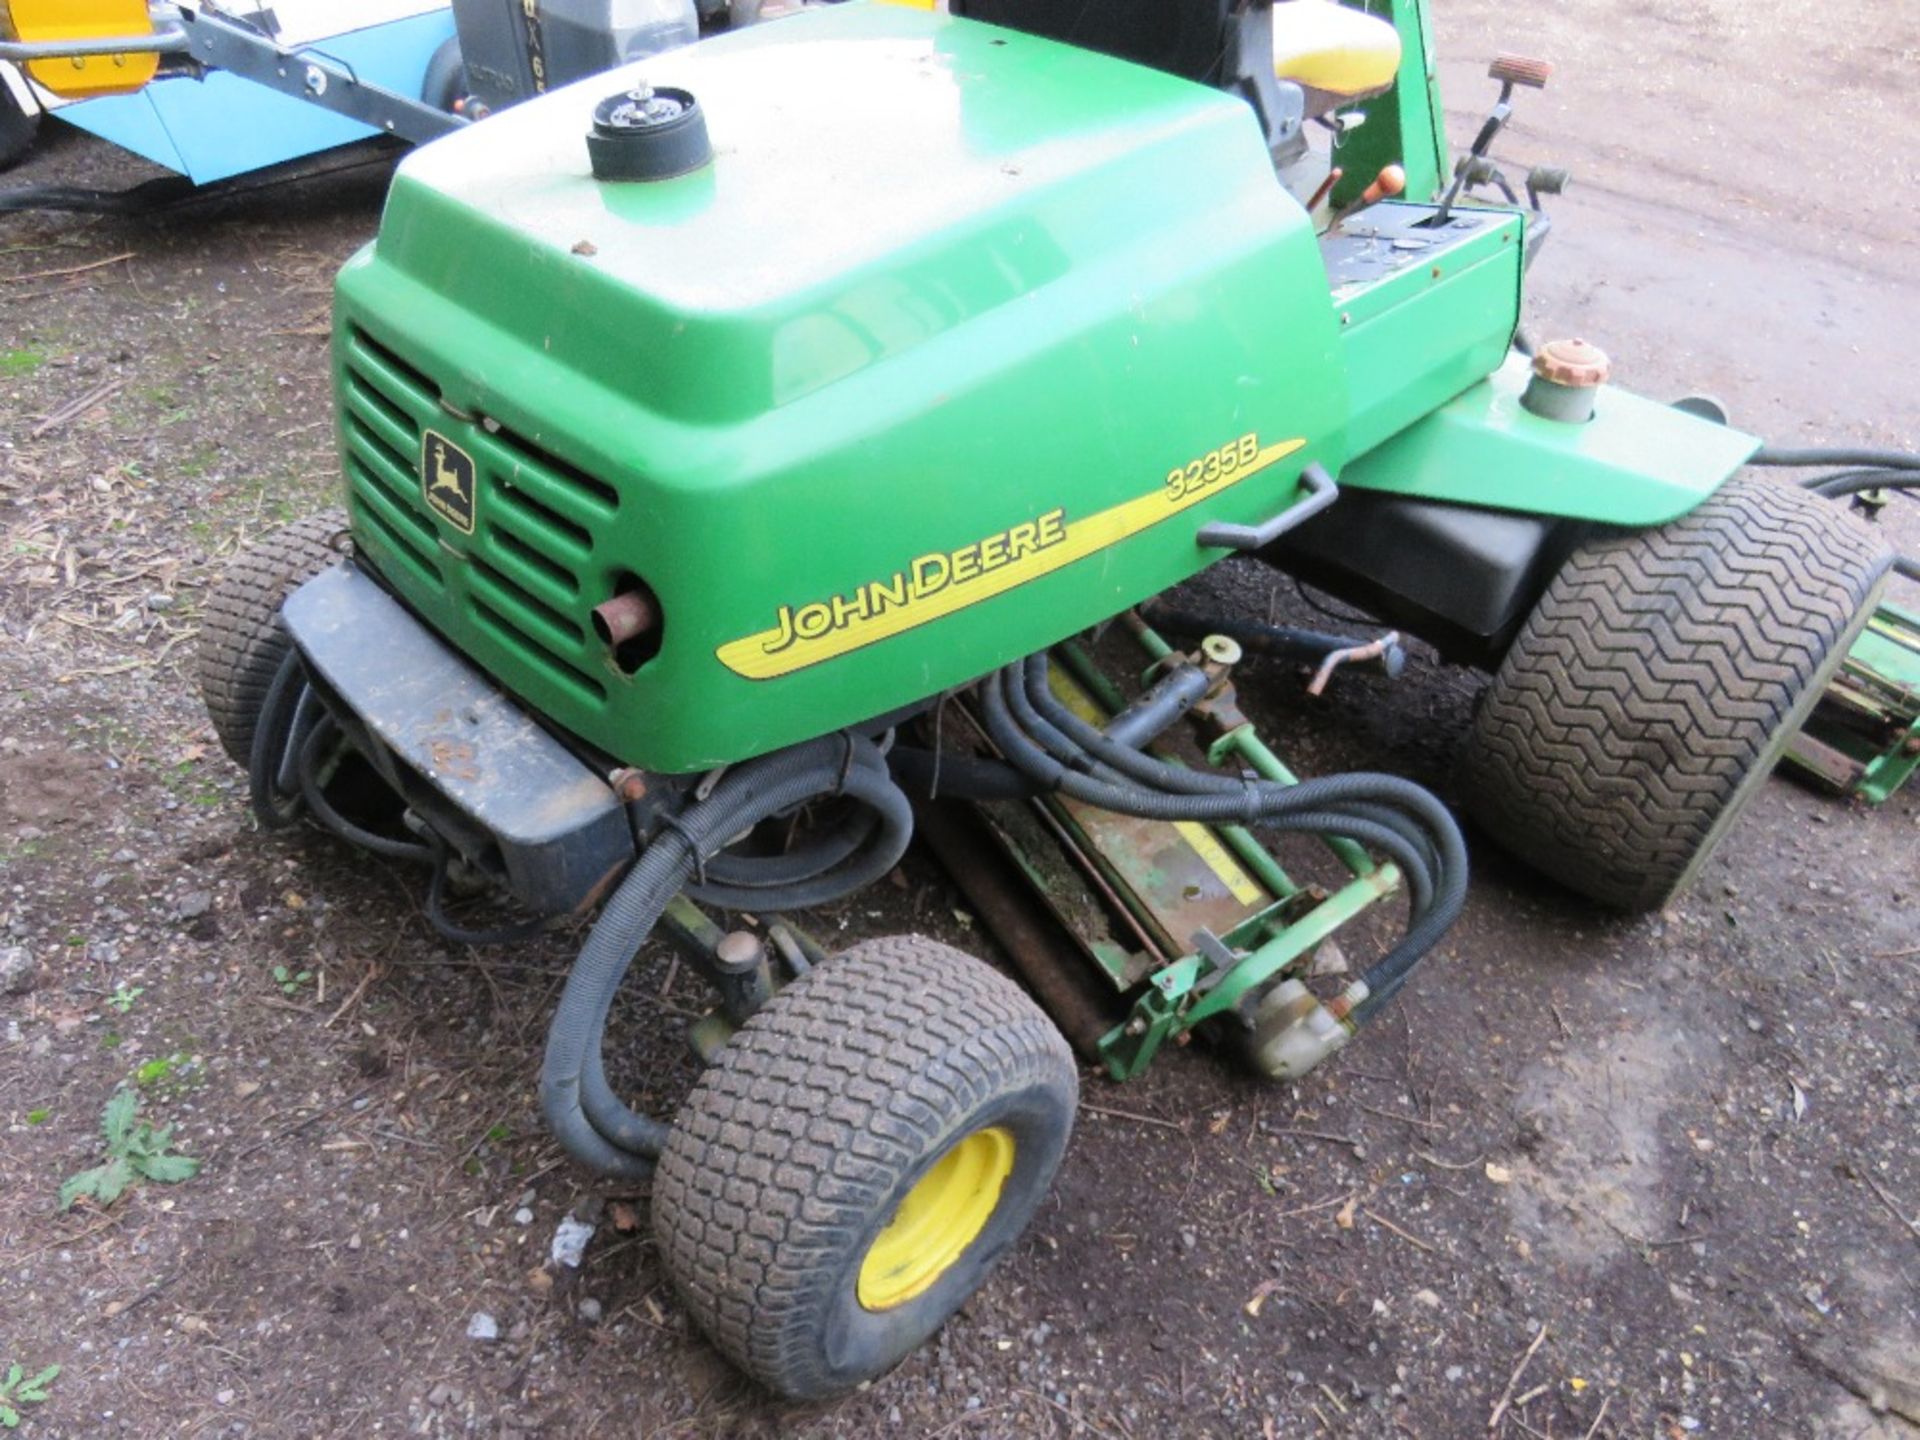 JOHN DEERE 3235B 5 GANG CYLINDER MOWER, YEAR 2001 APPROX. WHEN TESTED WAS SEEN TO RUN, DRIVE AND MOW - Image 3 of 11